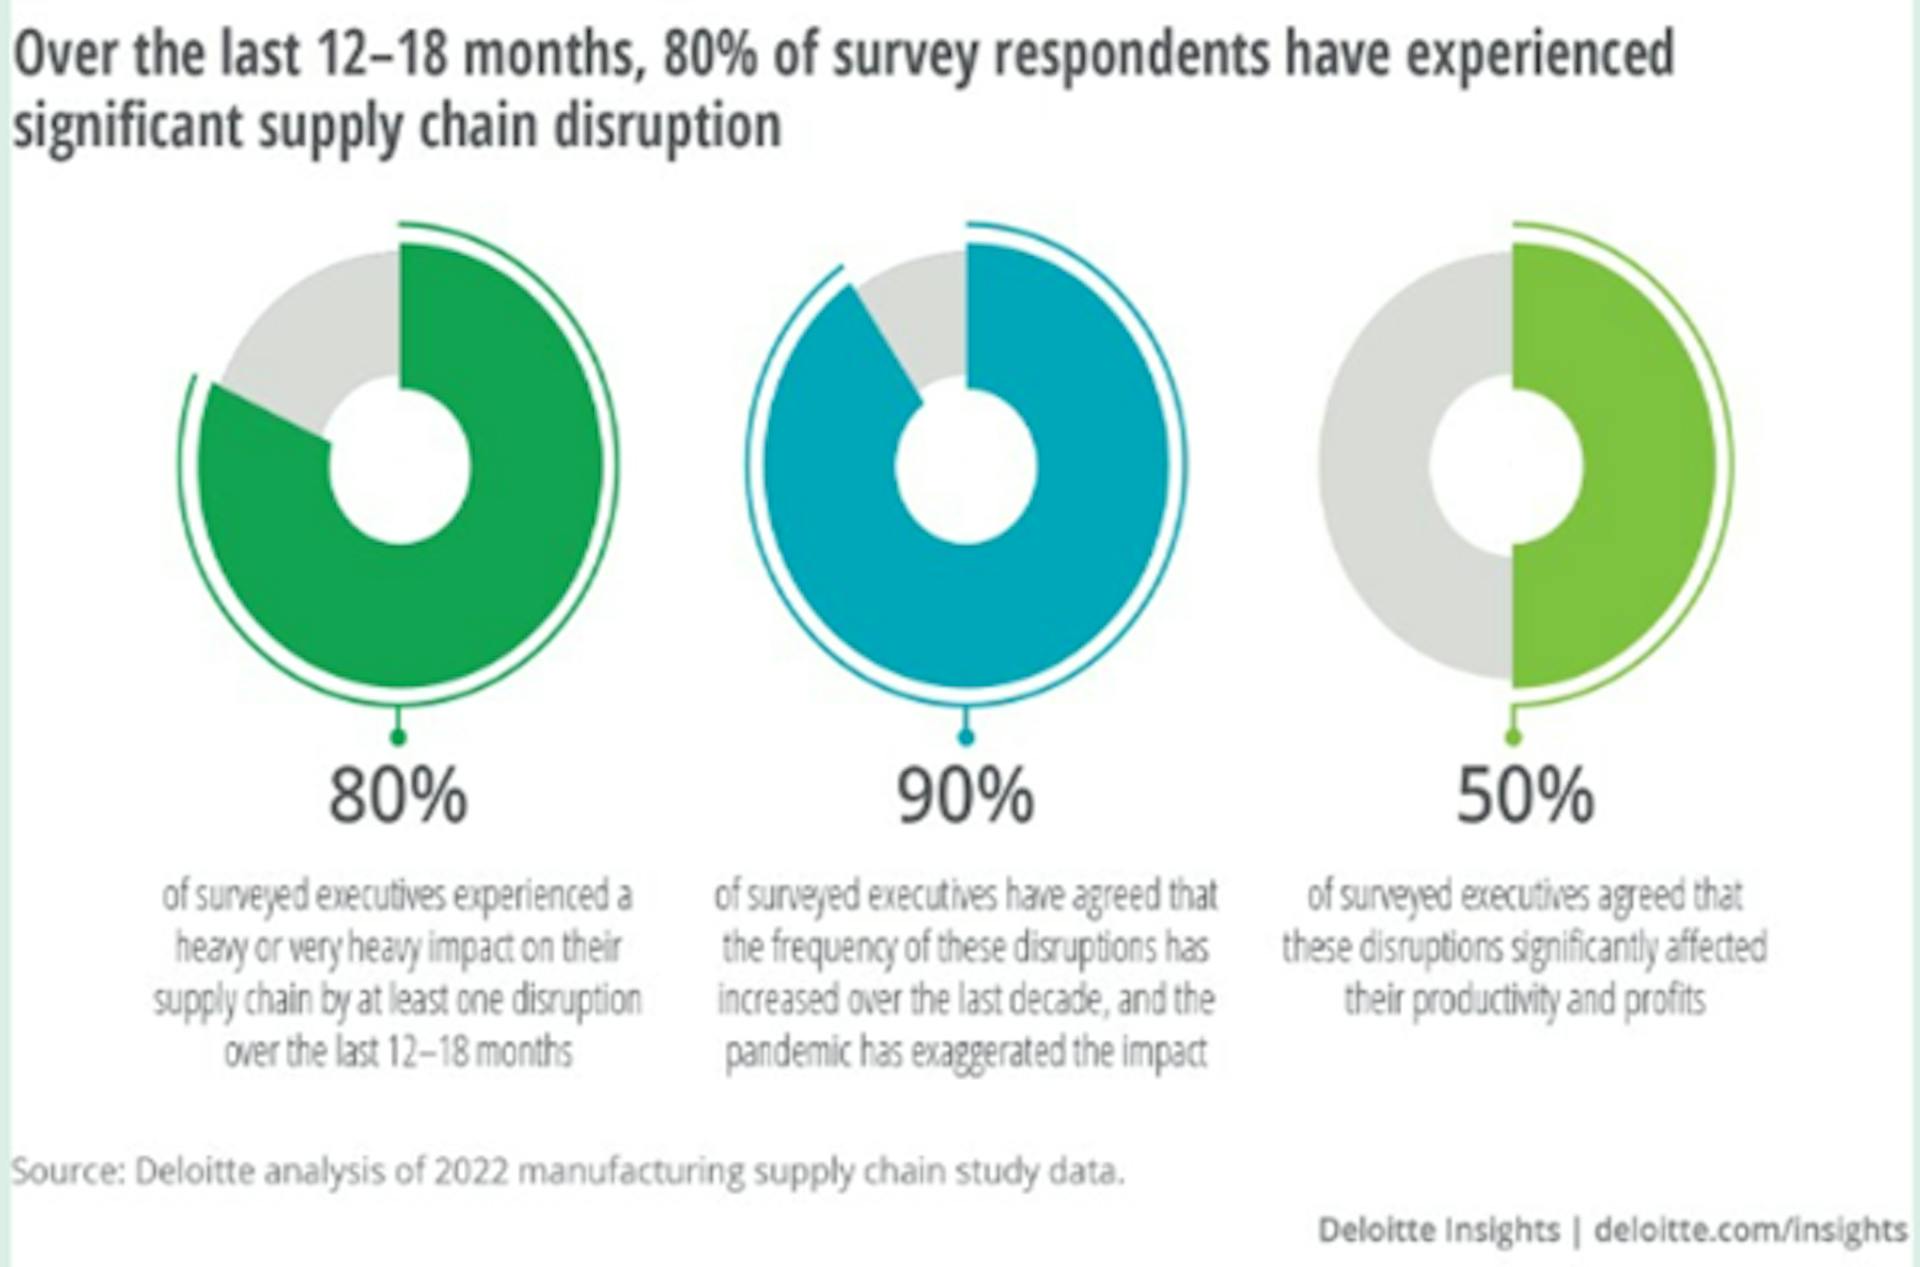 Global Supply Chains are Being Disrupted. Image Source: Deloitte